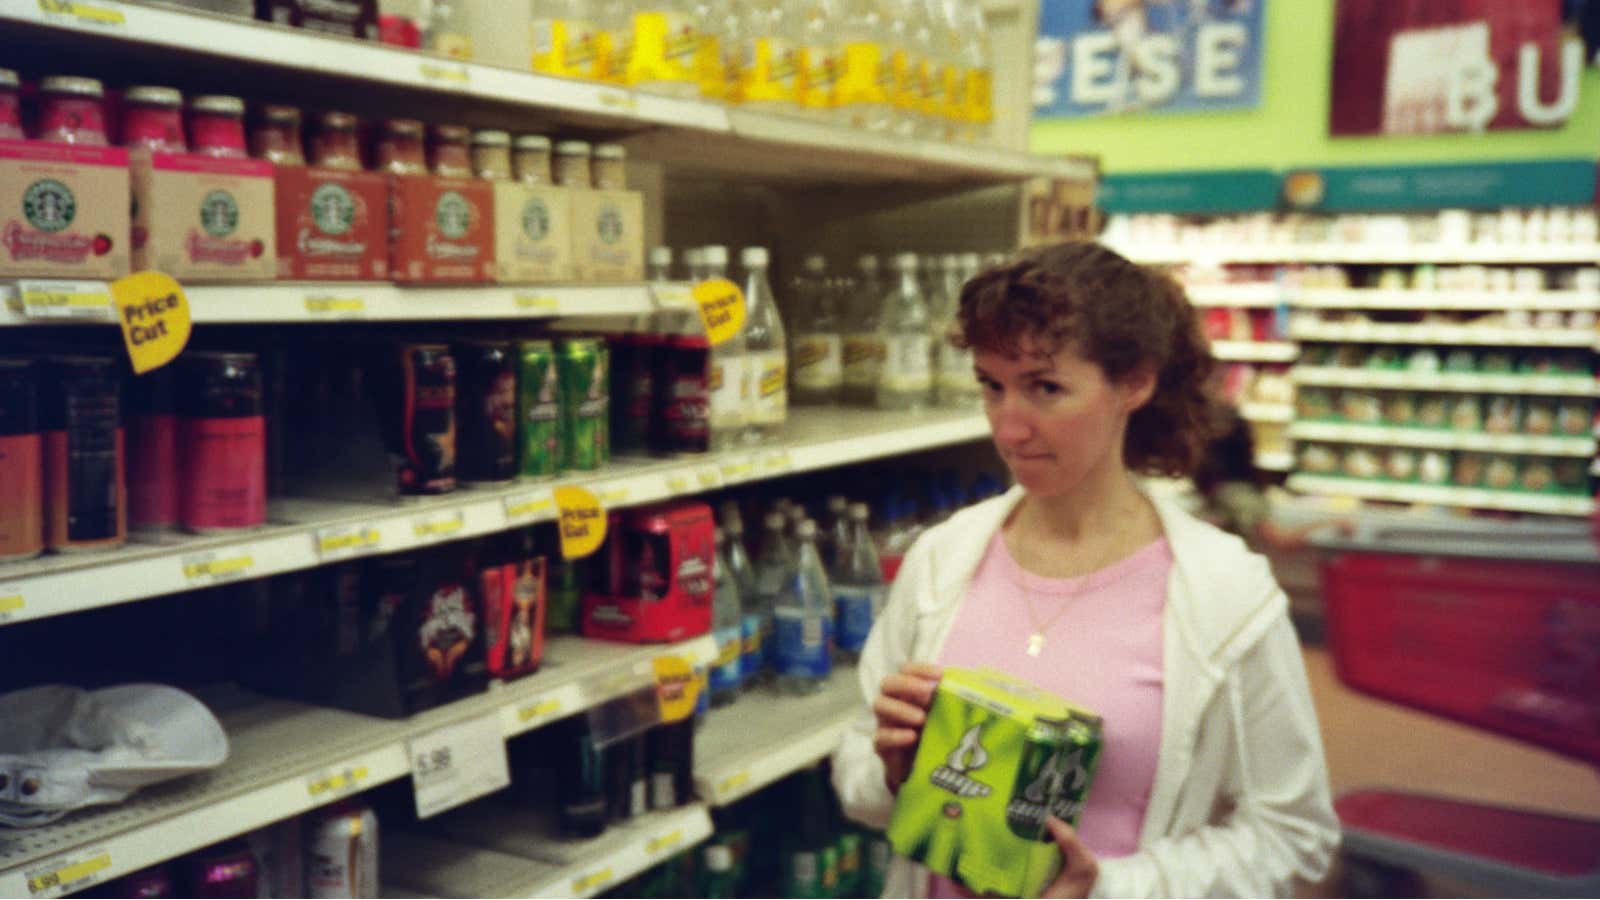 Exhausted moms and dads are the heaviest consumers of energy drinks